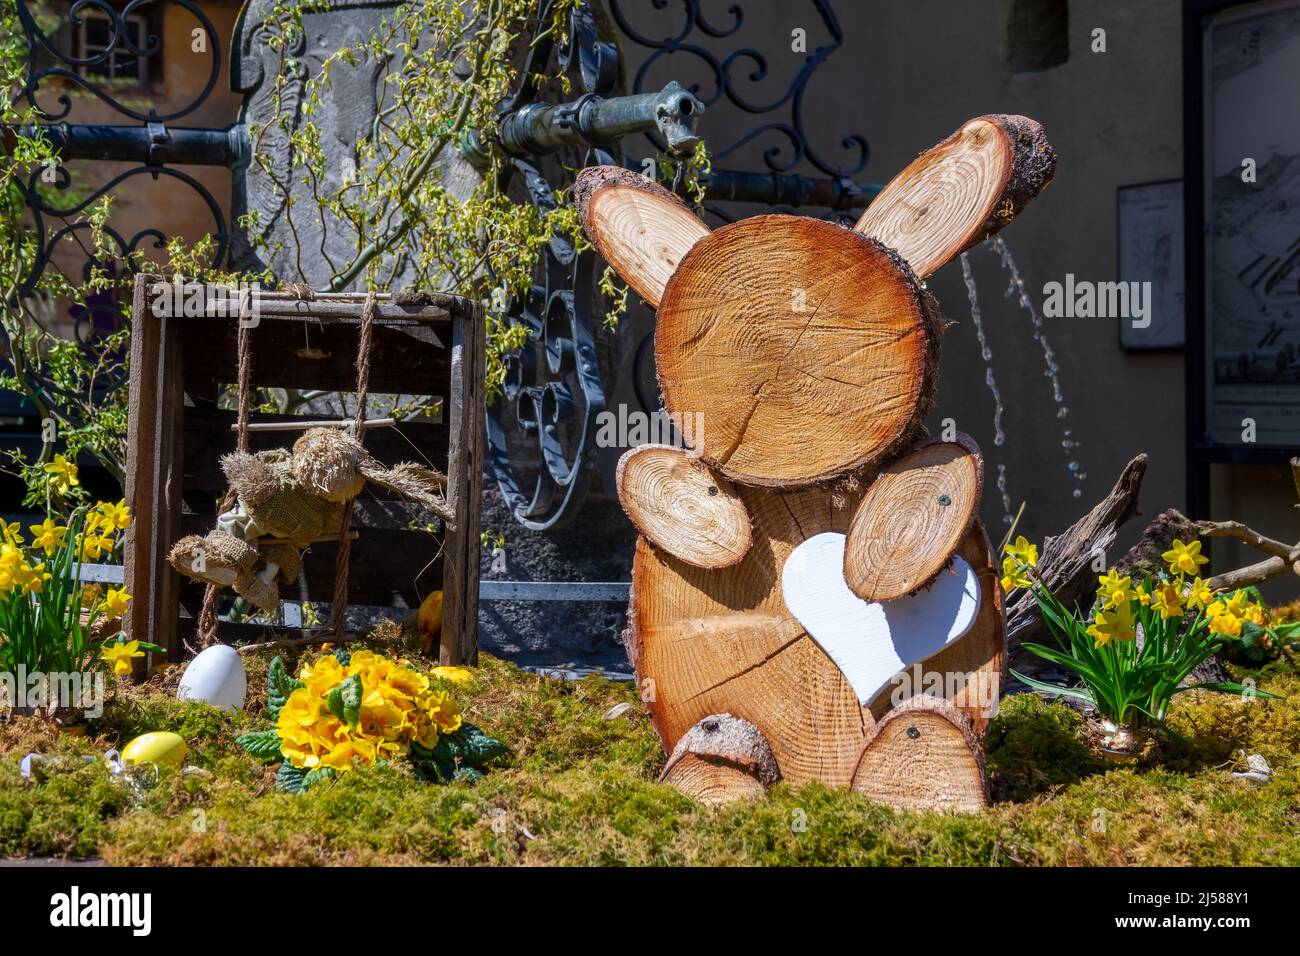 Rustic Easter decor with a wooden rabbit in a village in Alsace region, France Stock Photo